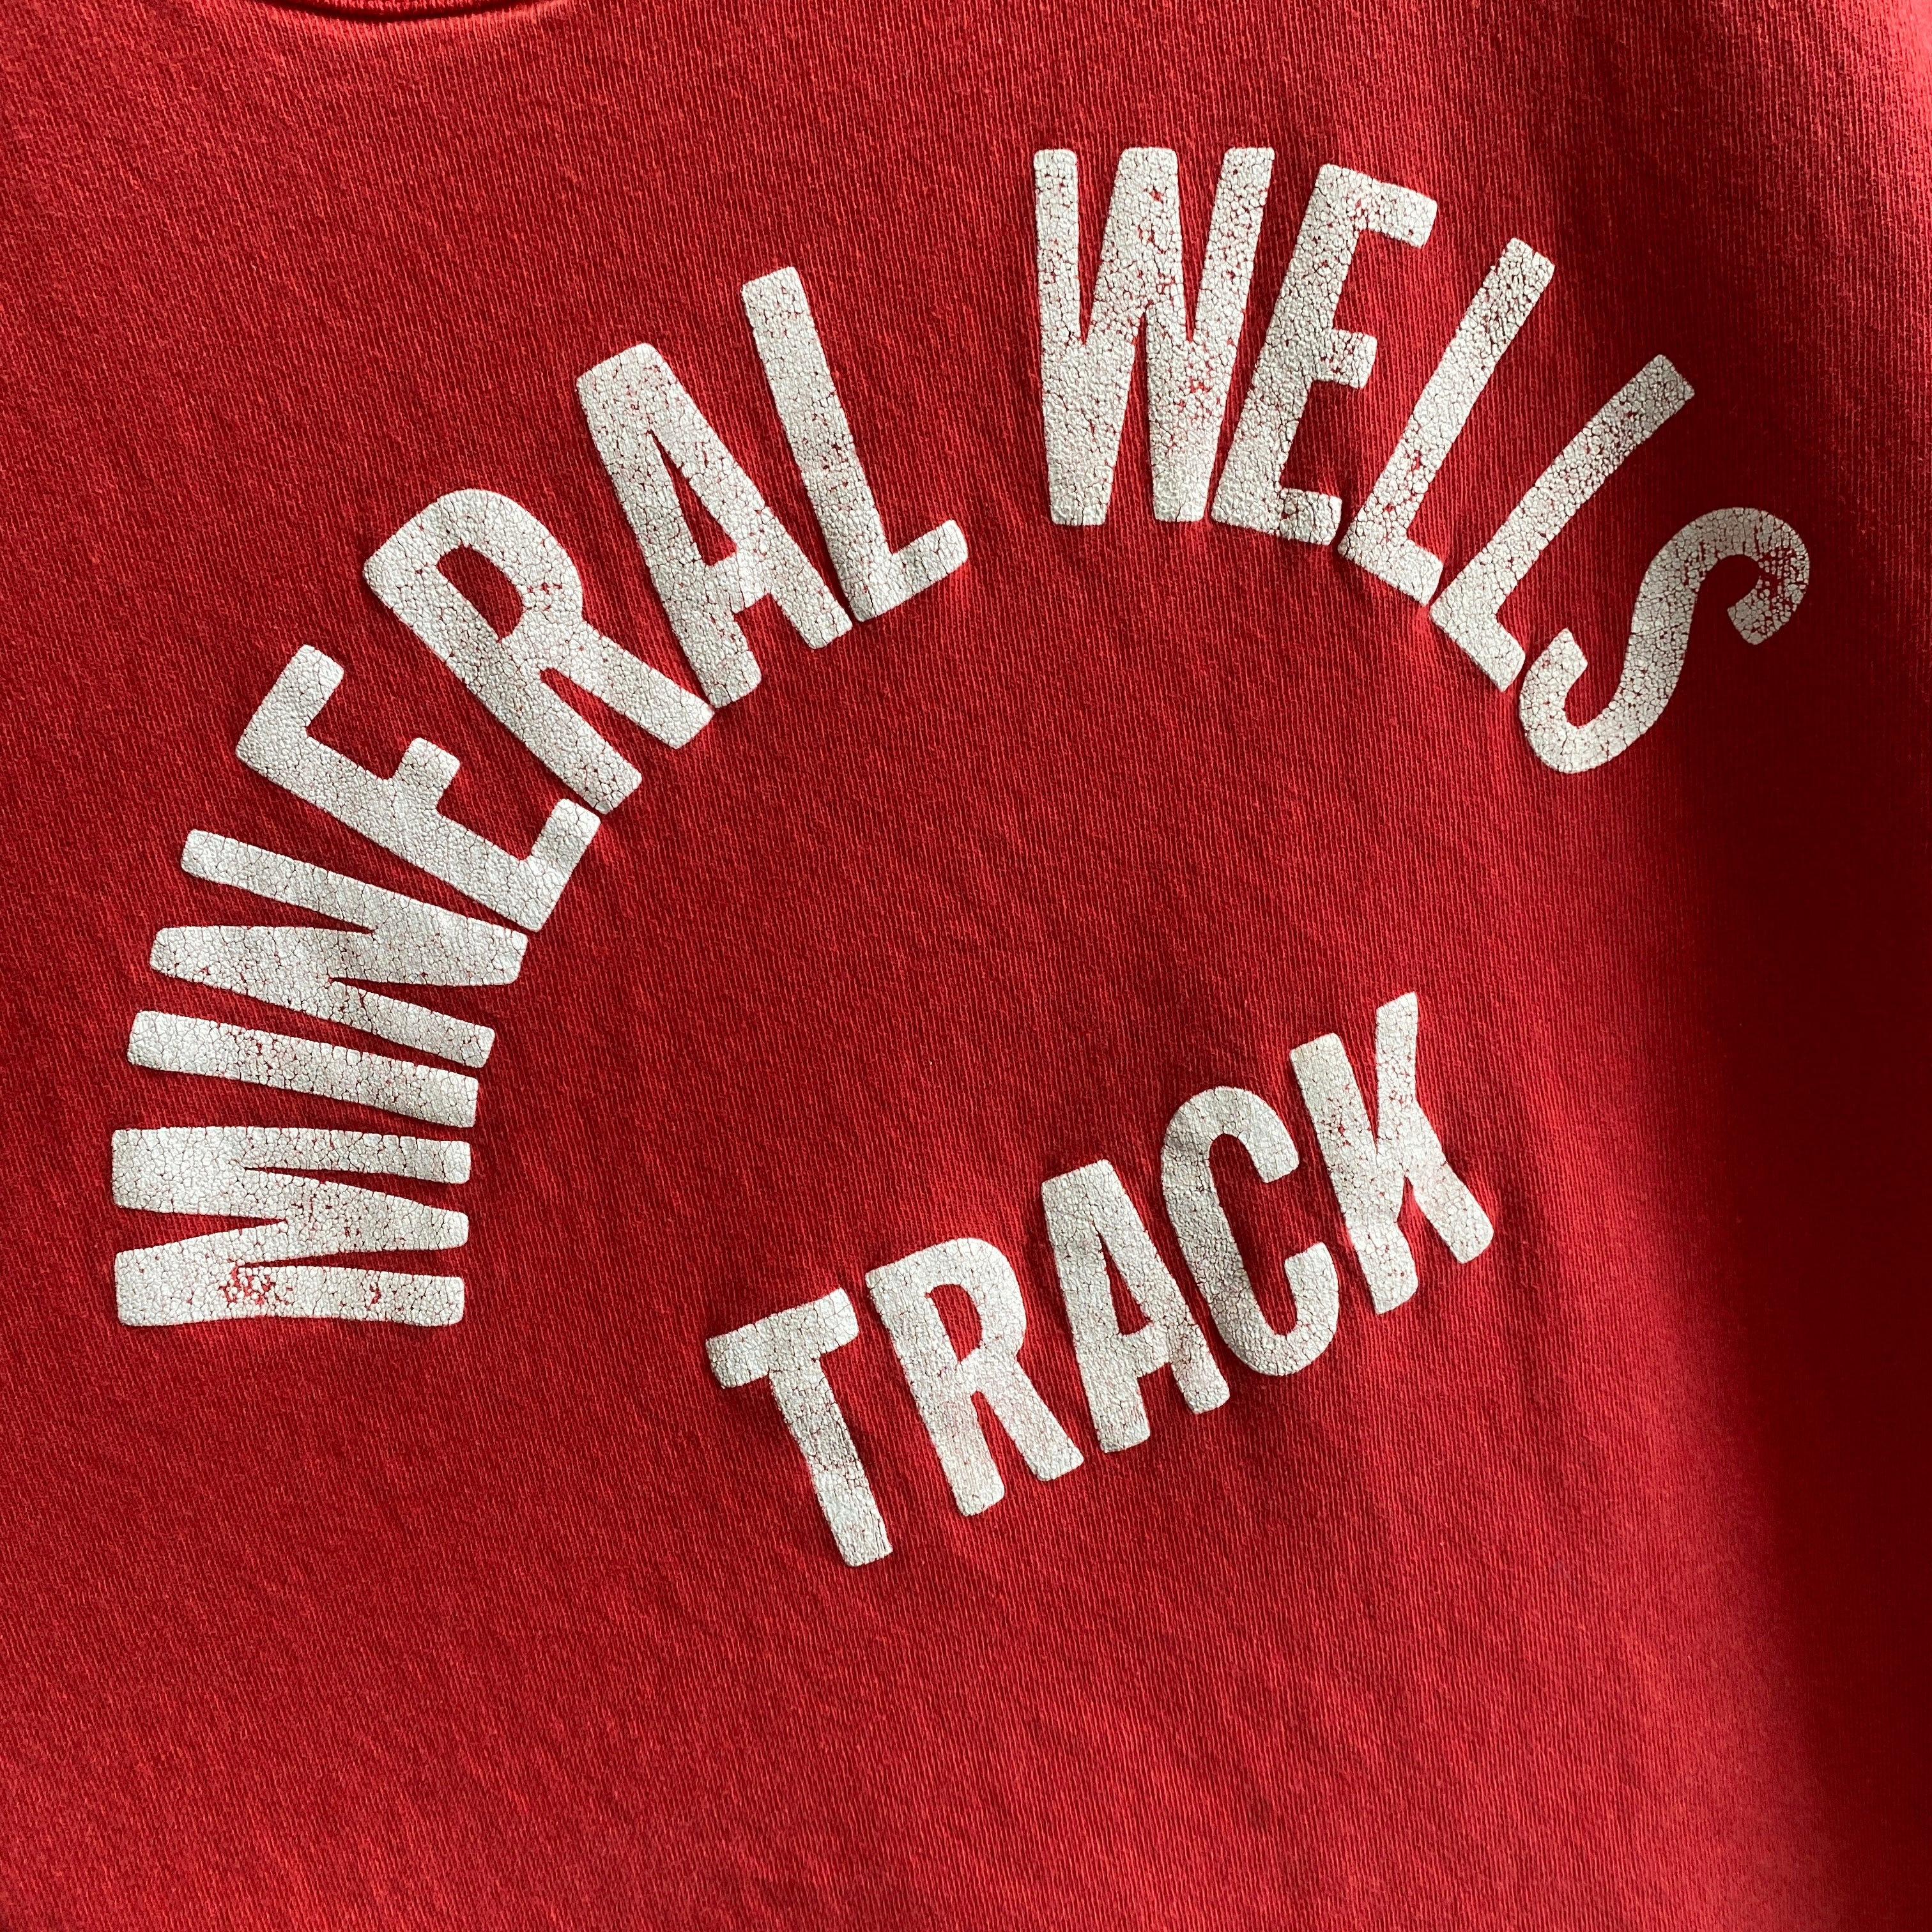 1970s Mineral Wells Track Rolled Neck Cut Sleeve Cotton T-Shirt by Russell